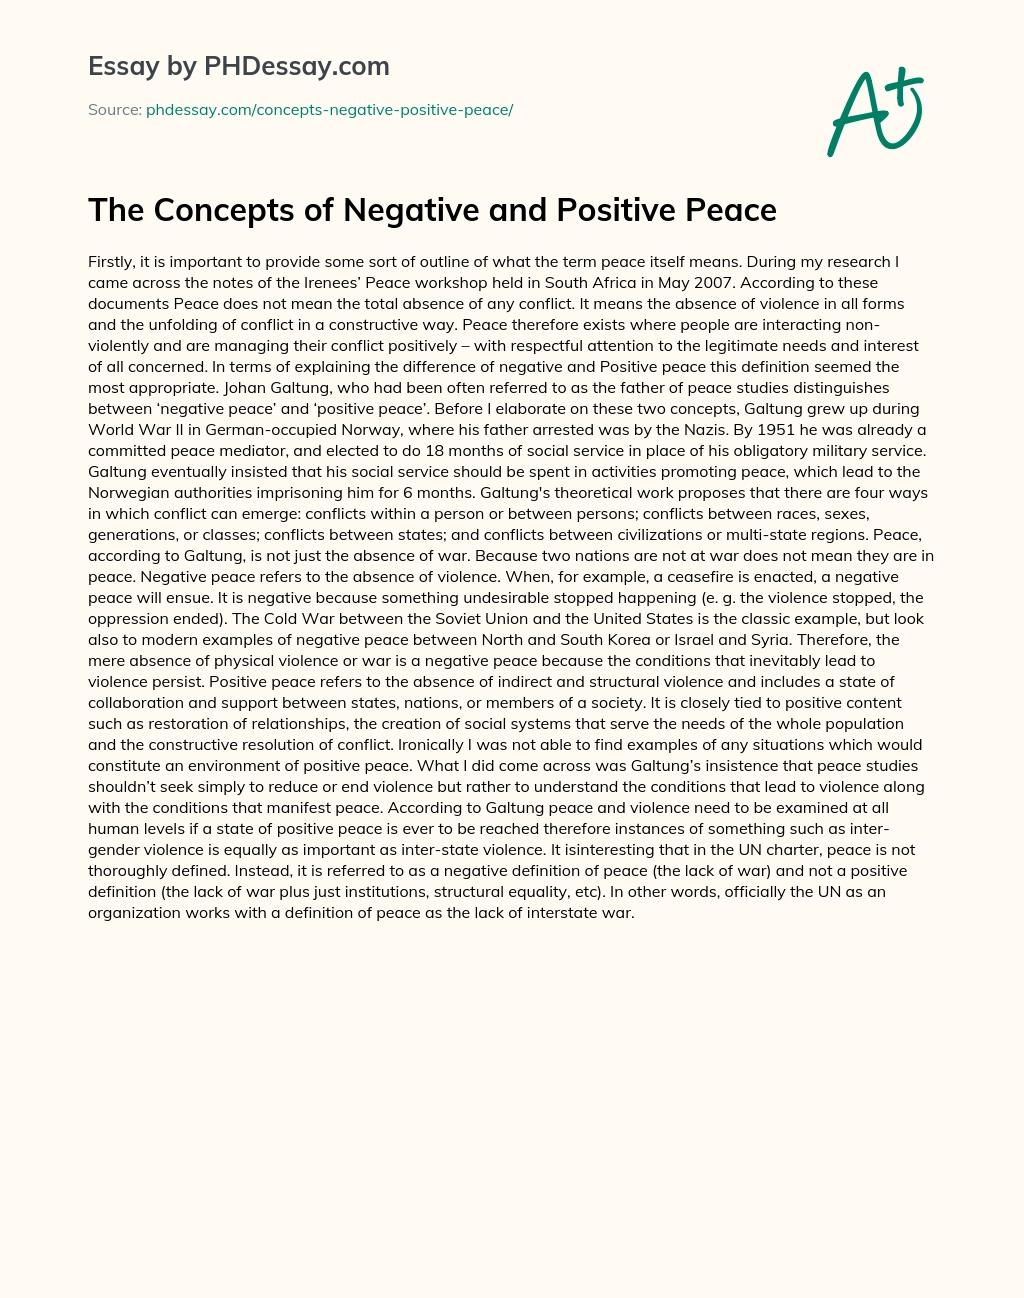 The Concepts of Negative and Positive Peace essay